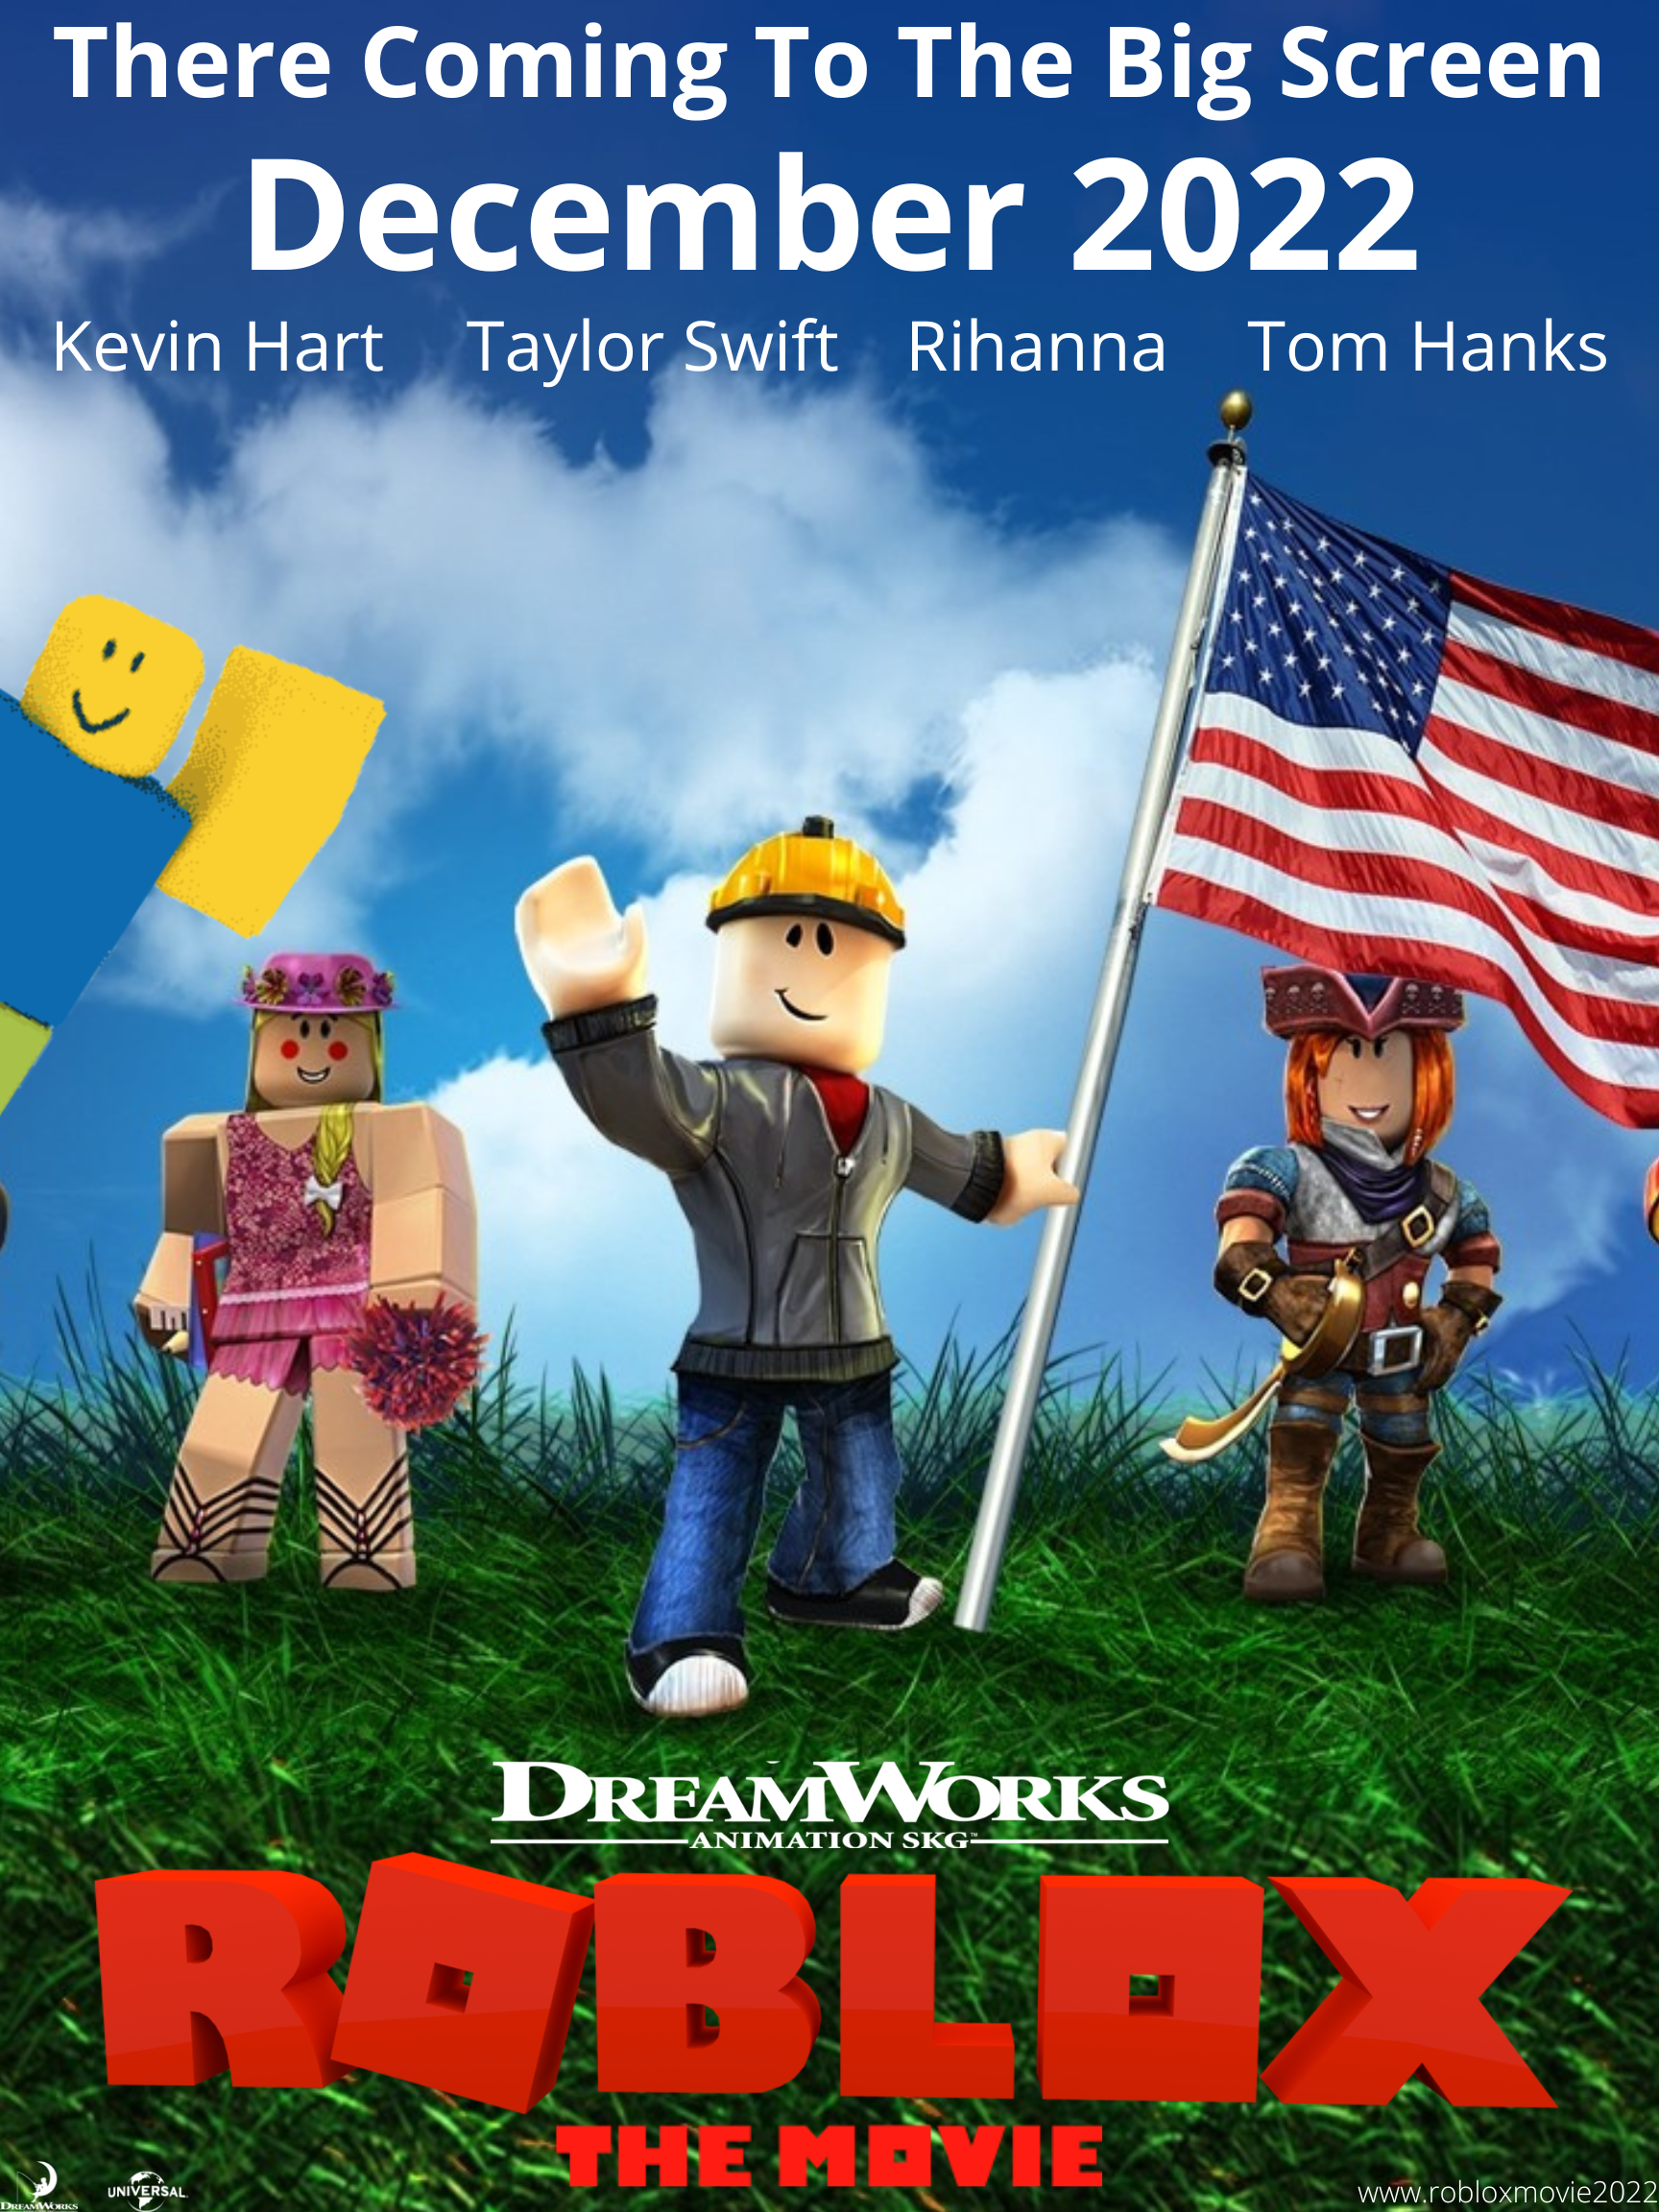 Movie poster featuring pixar characters in roblox style